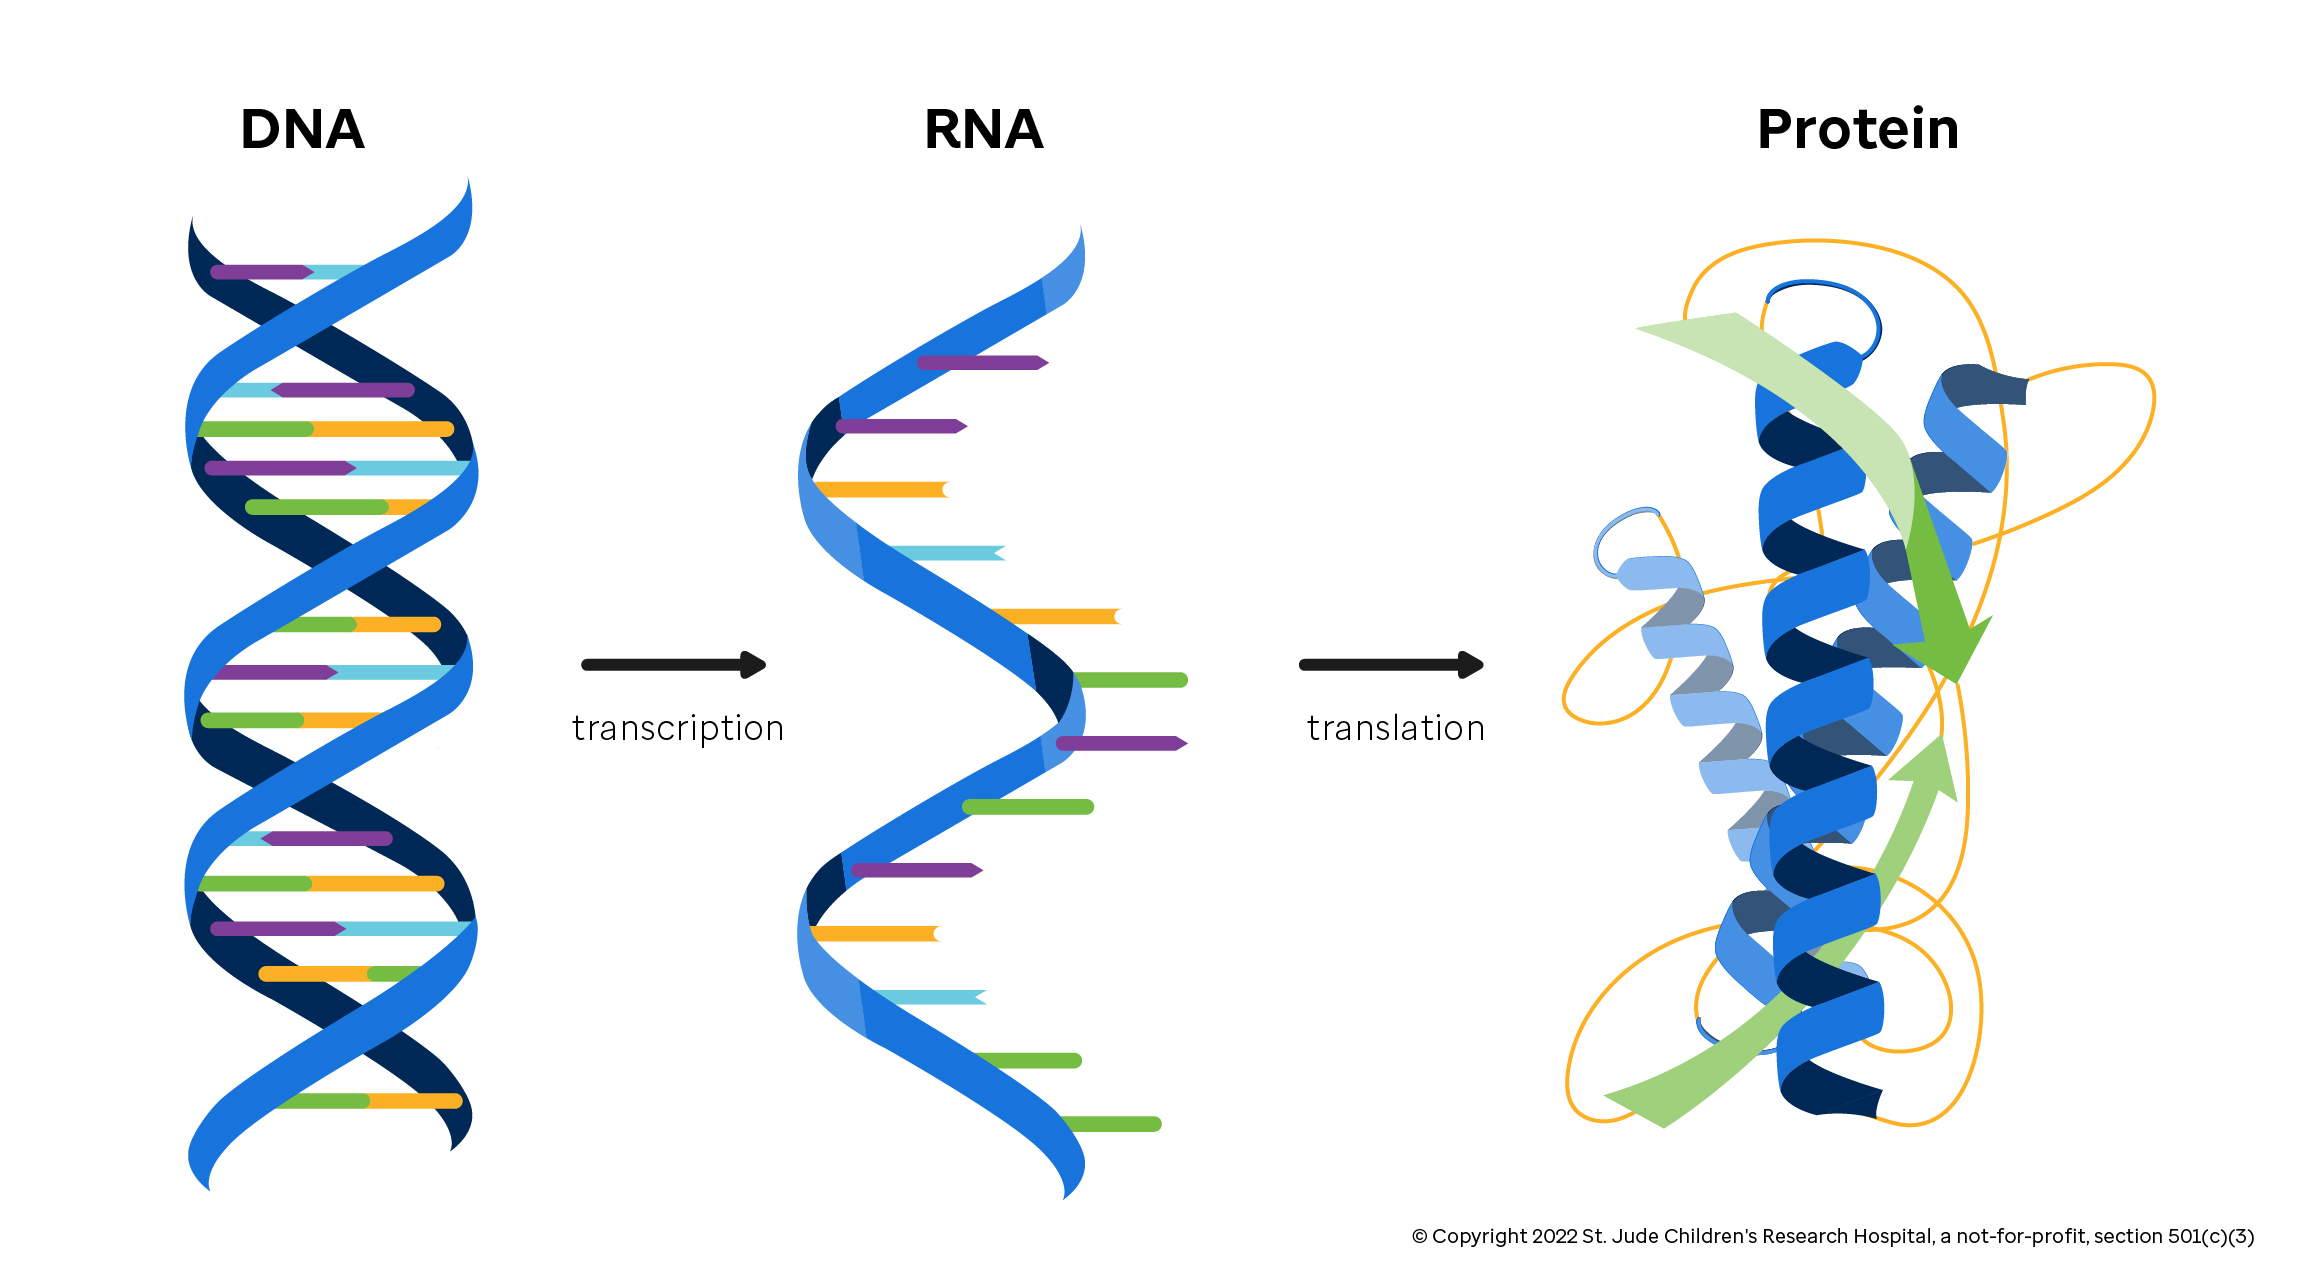 The central dogma of molecular biology, with DNA being transcribed into RNA, and RNA being translated into a protein.